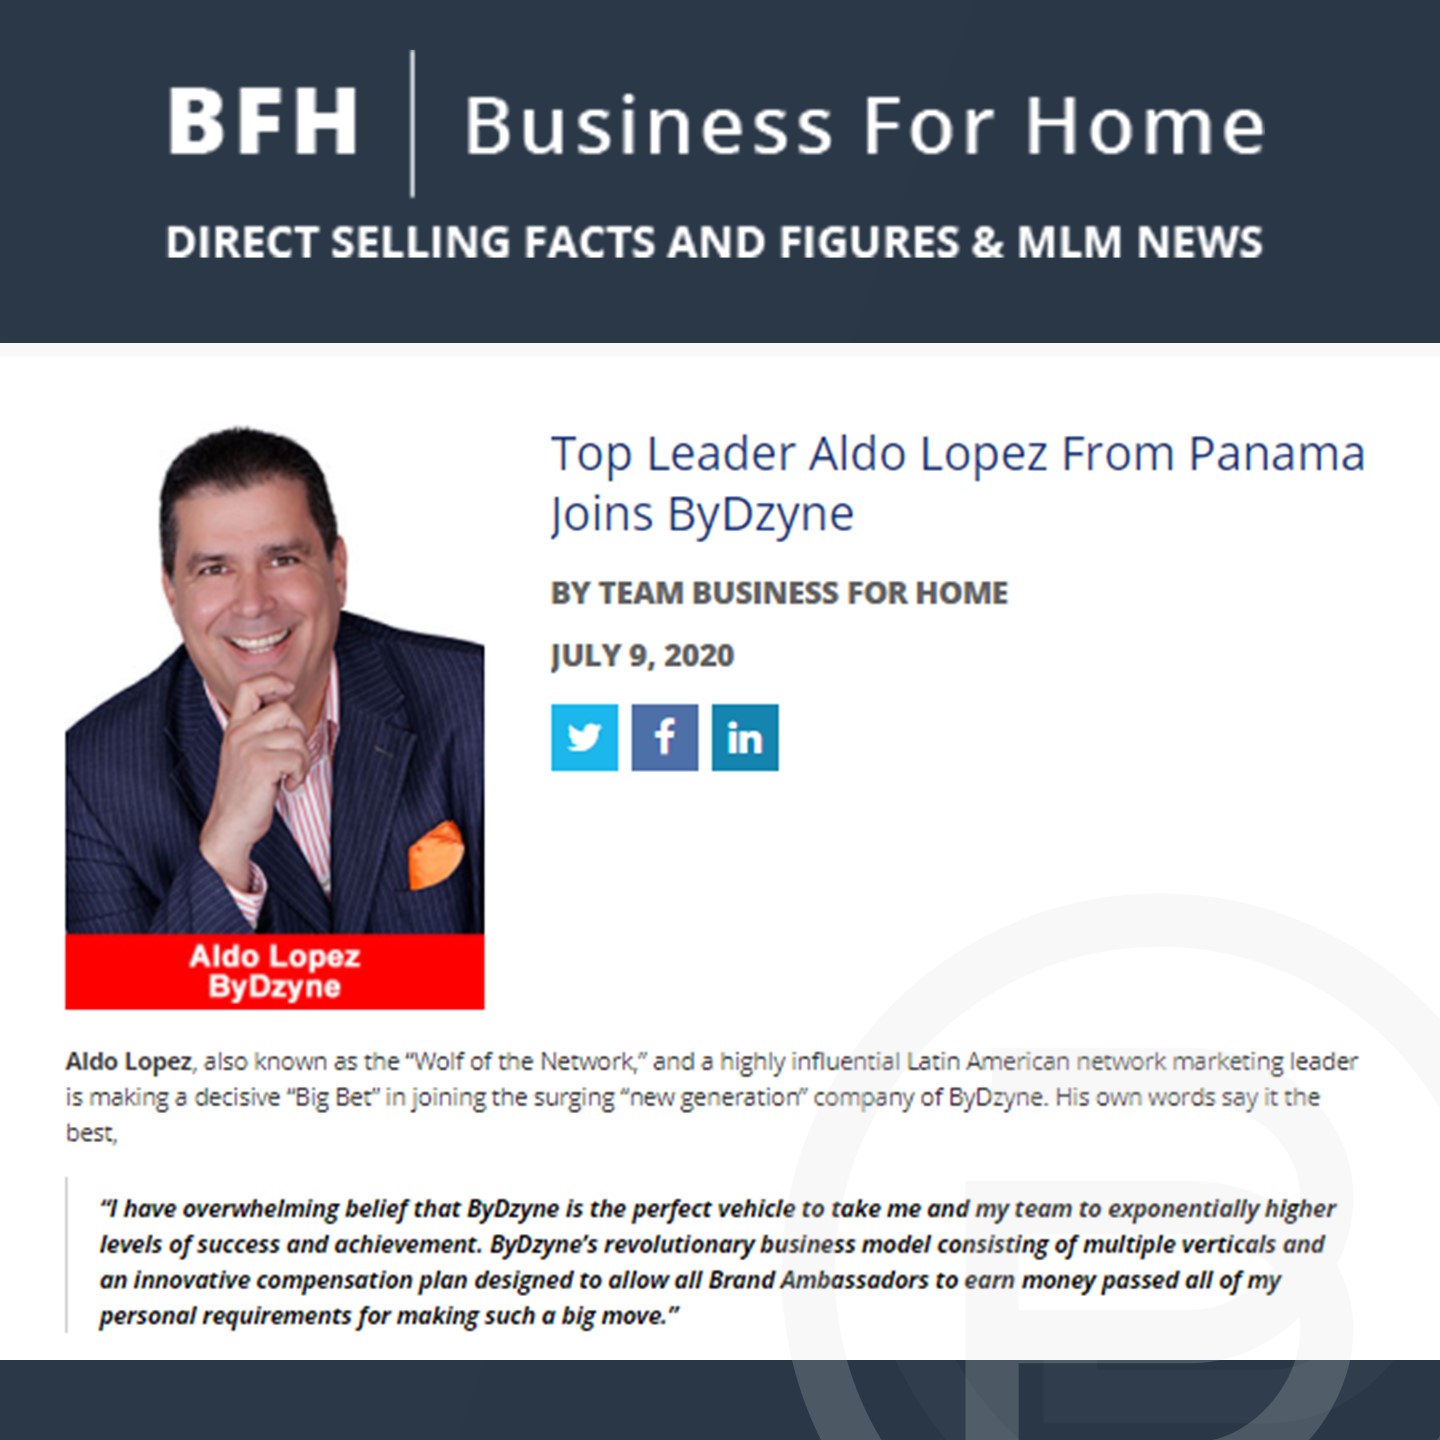 BFH: Top Leader Aldo Lopez From Panama Joins ByDzyne